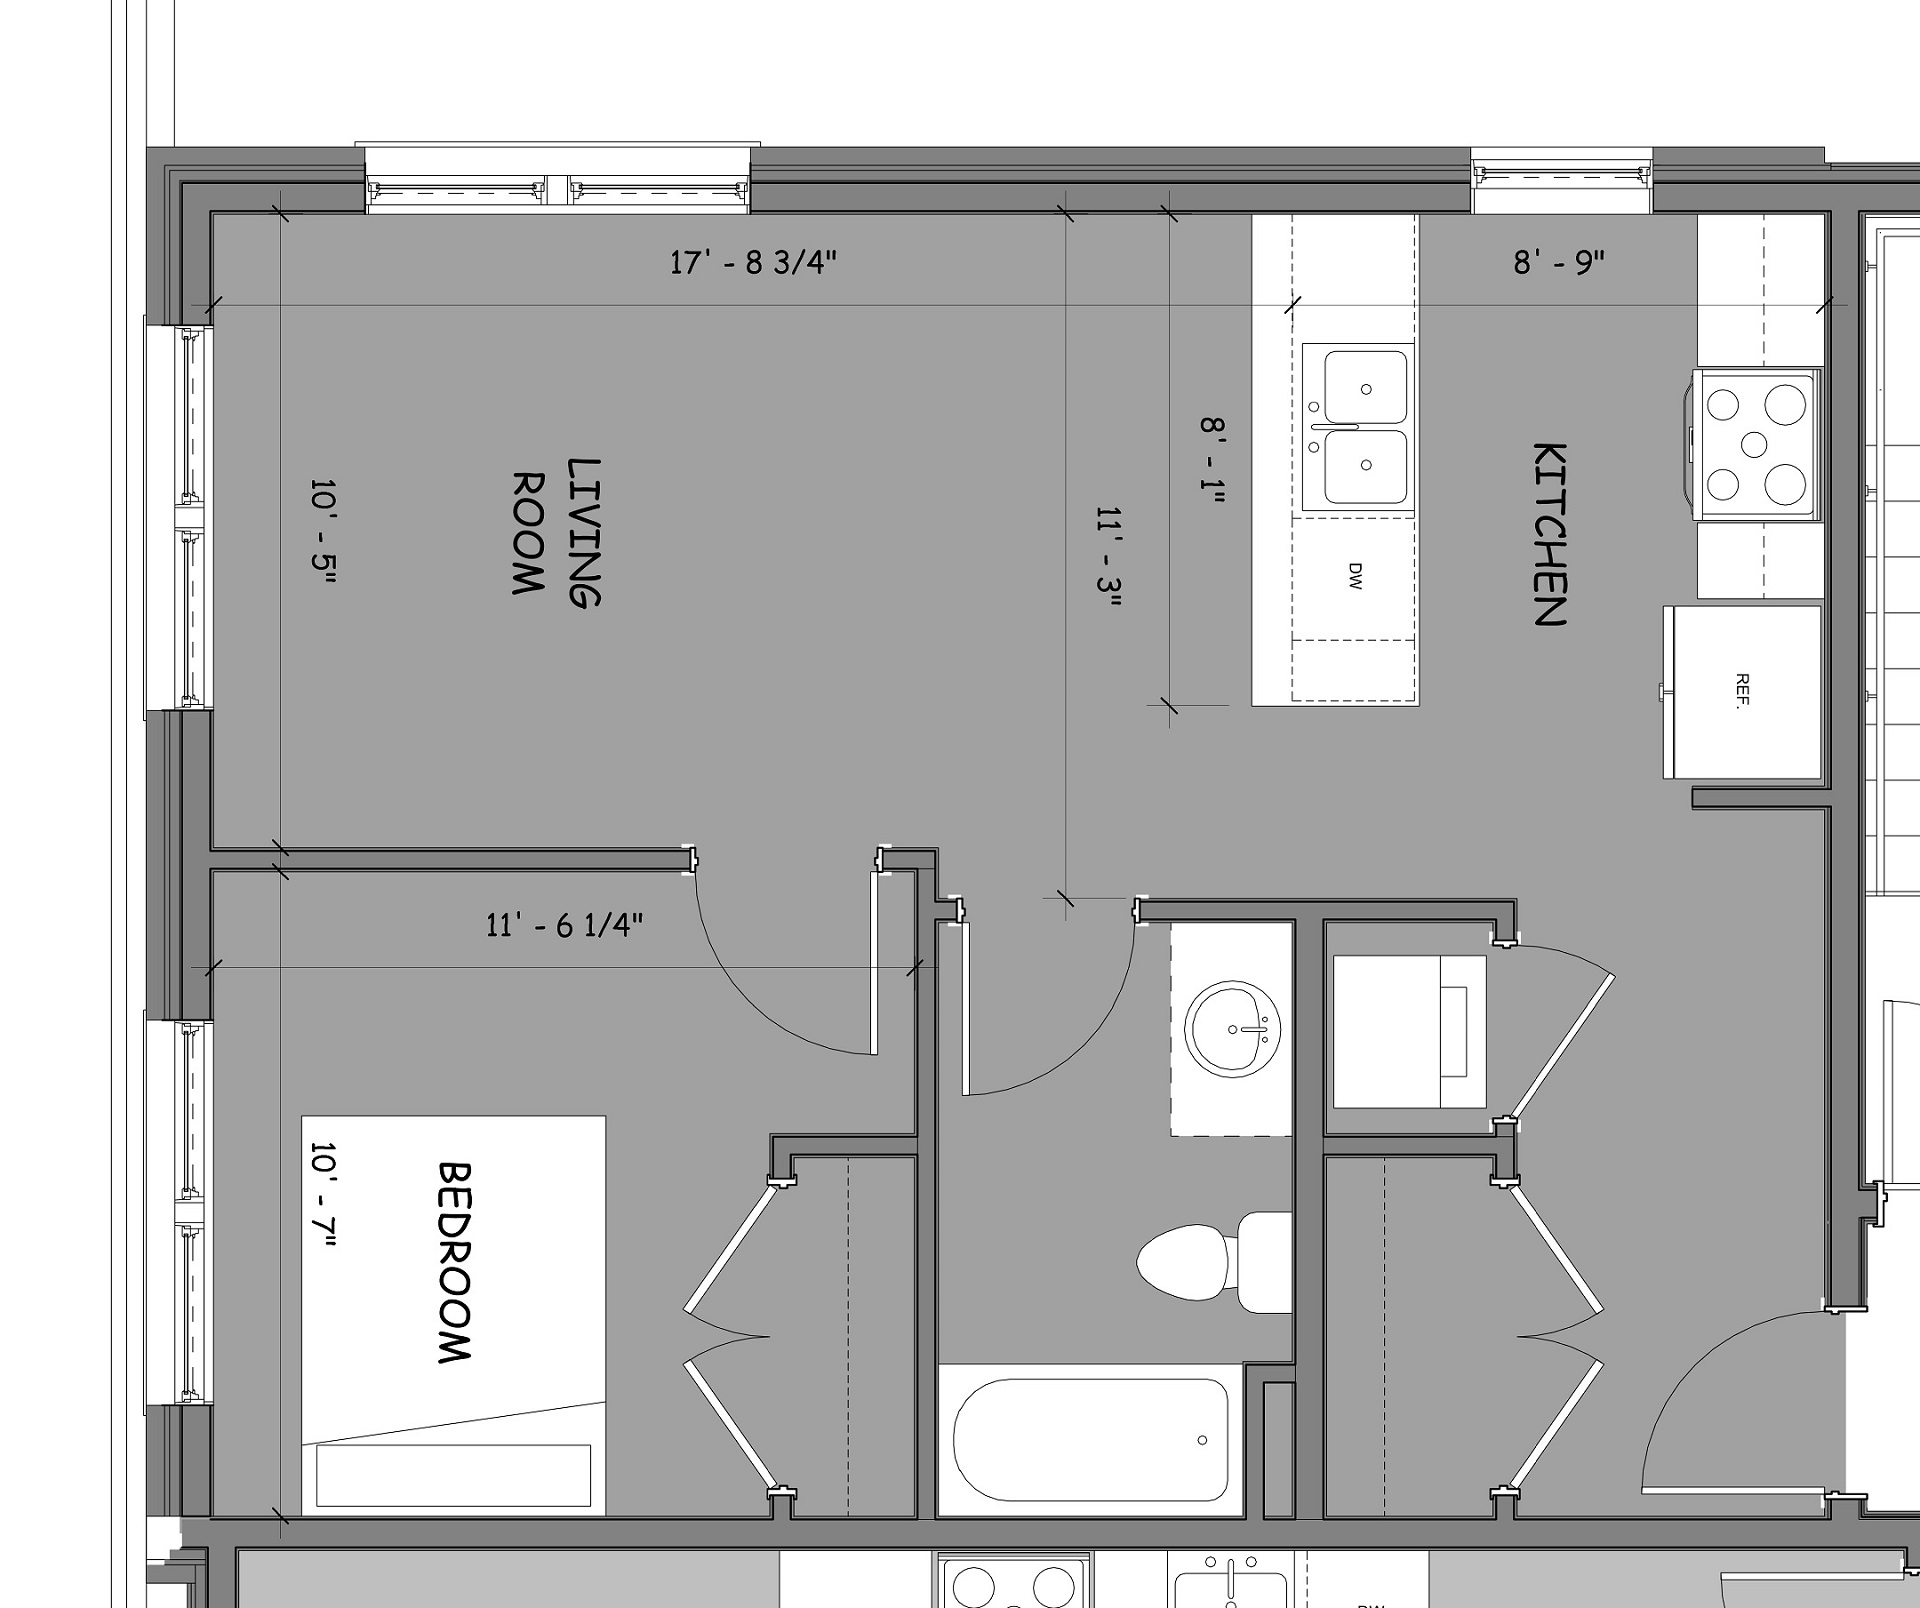 Floor Plan of a Real Estate Apartment